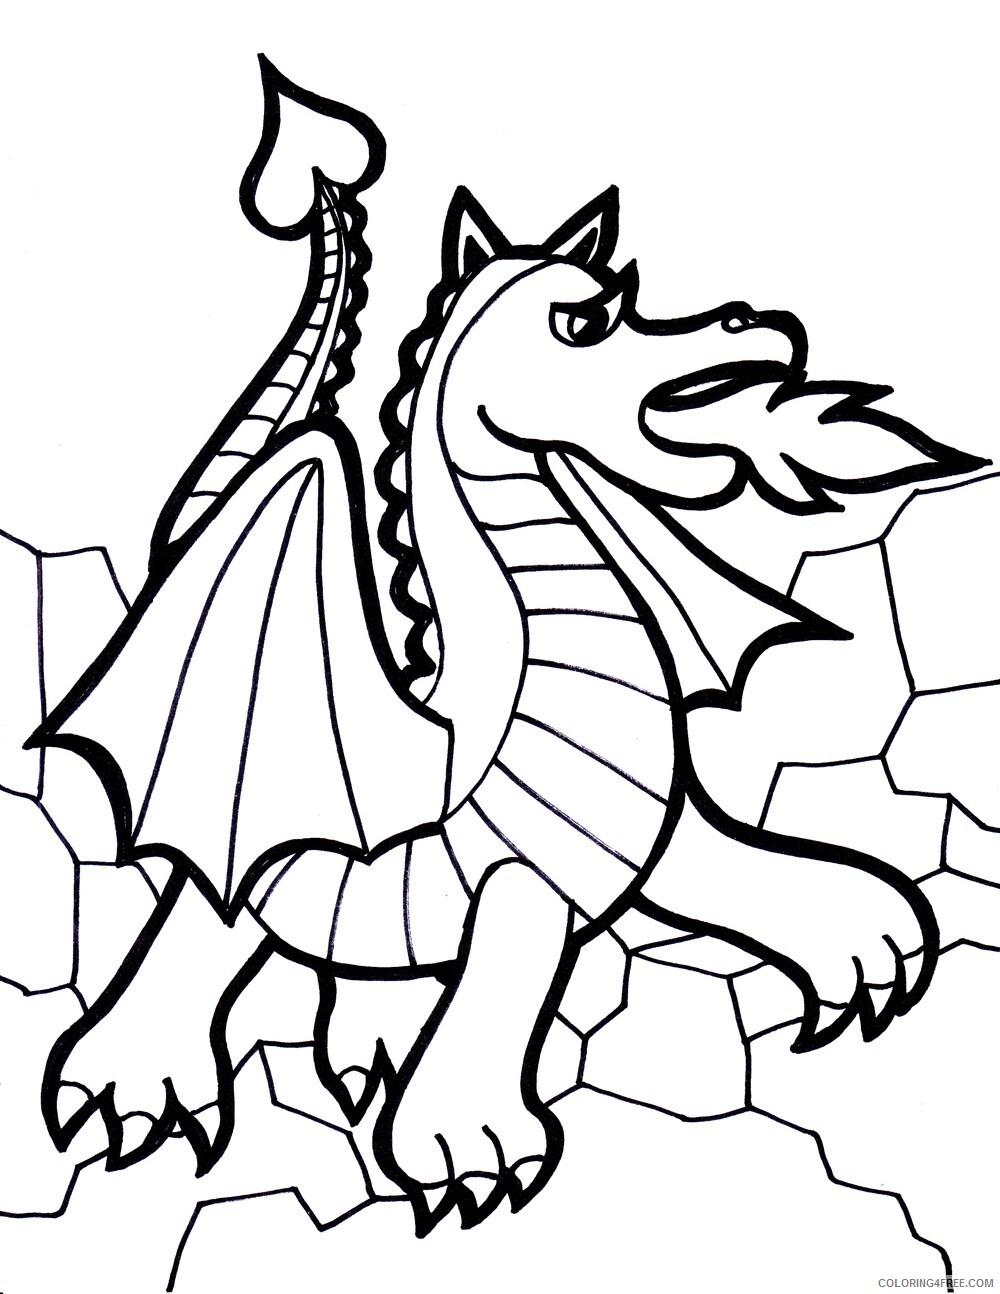 Fantasy Dragons Coloring Pages of Dragons Printable 2021 2556 Coloring4free